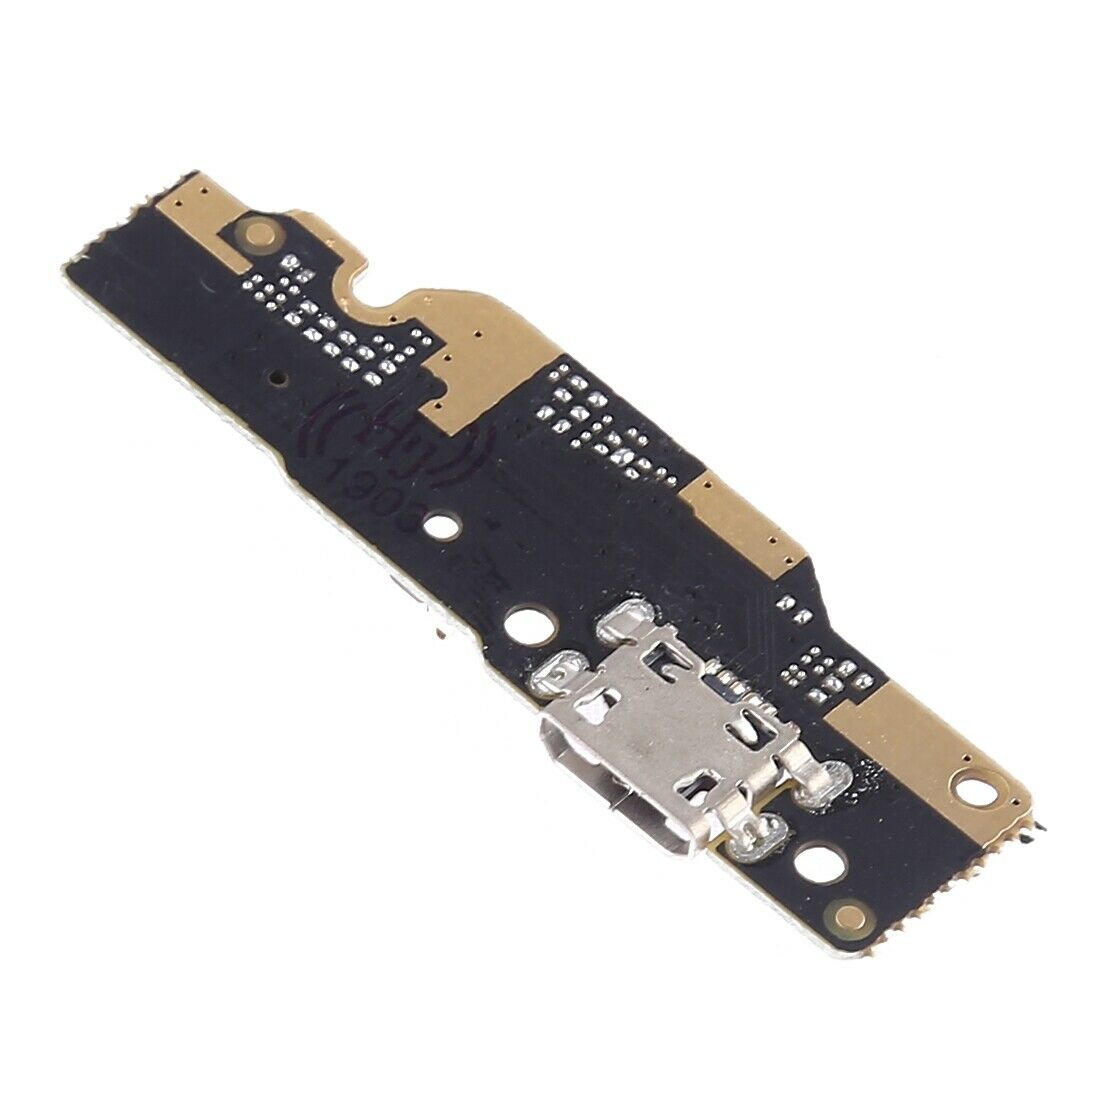 Xiaomi Redmi Note 6 / 6 Pro Charging Port Board With Mic for [product_price] - First Help Tech